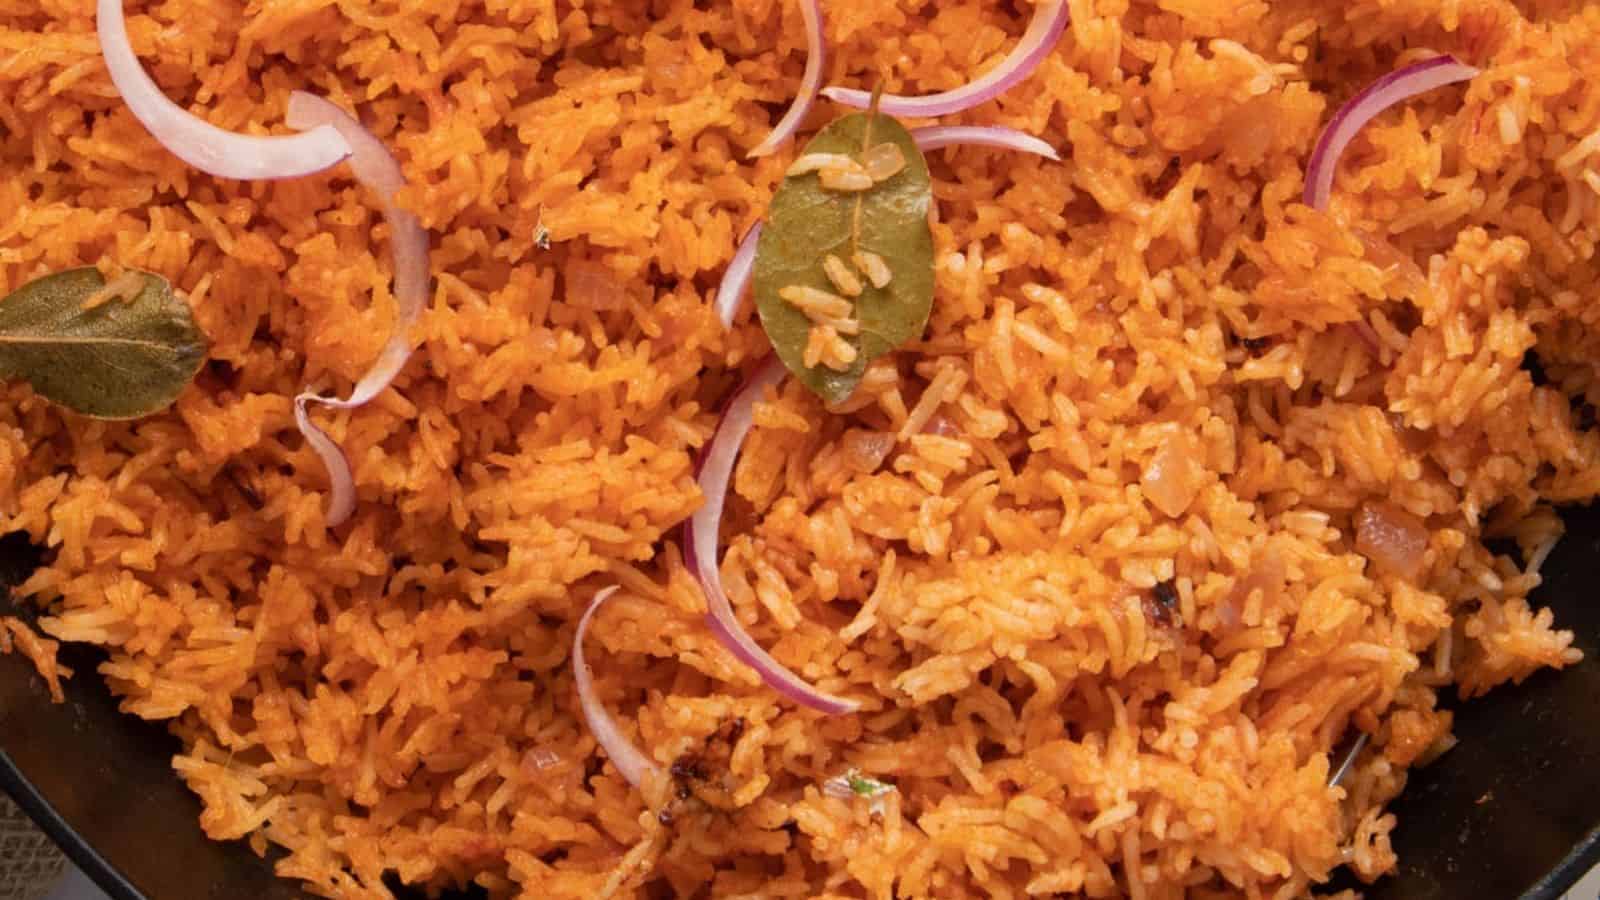 A close up image of nigerian jolloff rice garnished with slices of red onion and bay leaves.